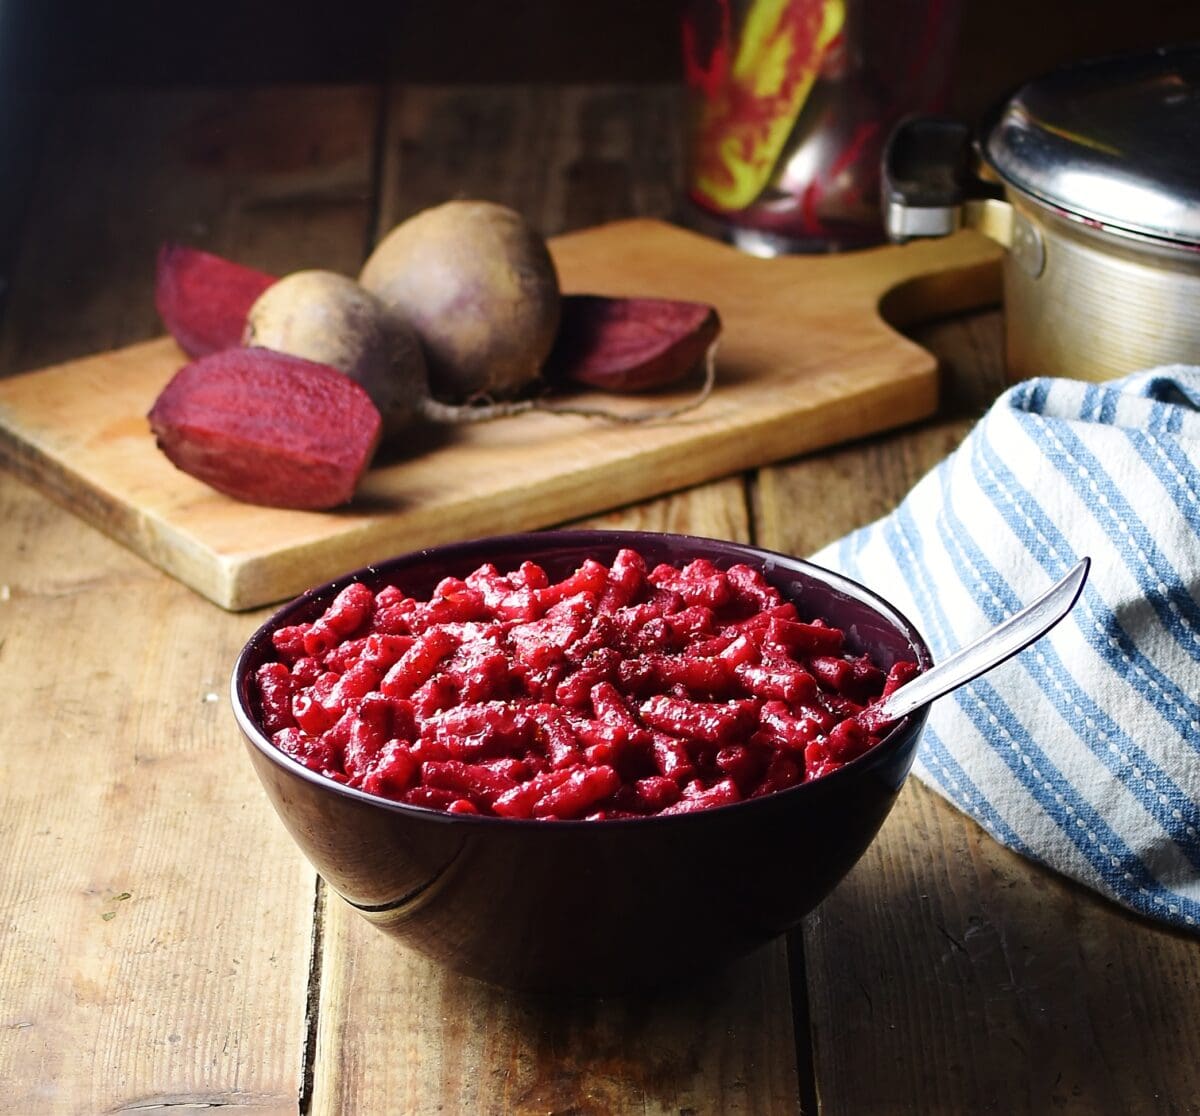 Beetroot macaroni in purple bowl with spoon, raw beets on wooden board and stripy blue cloth in background.